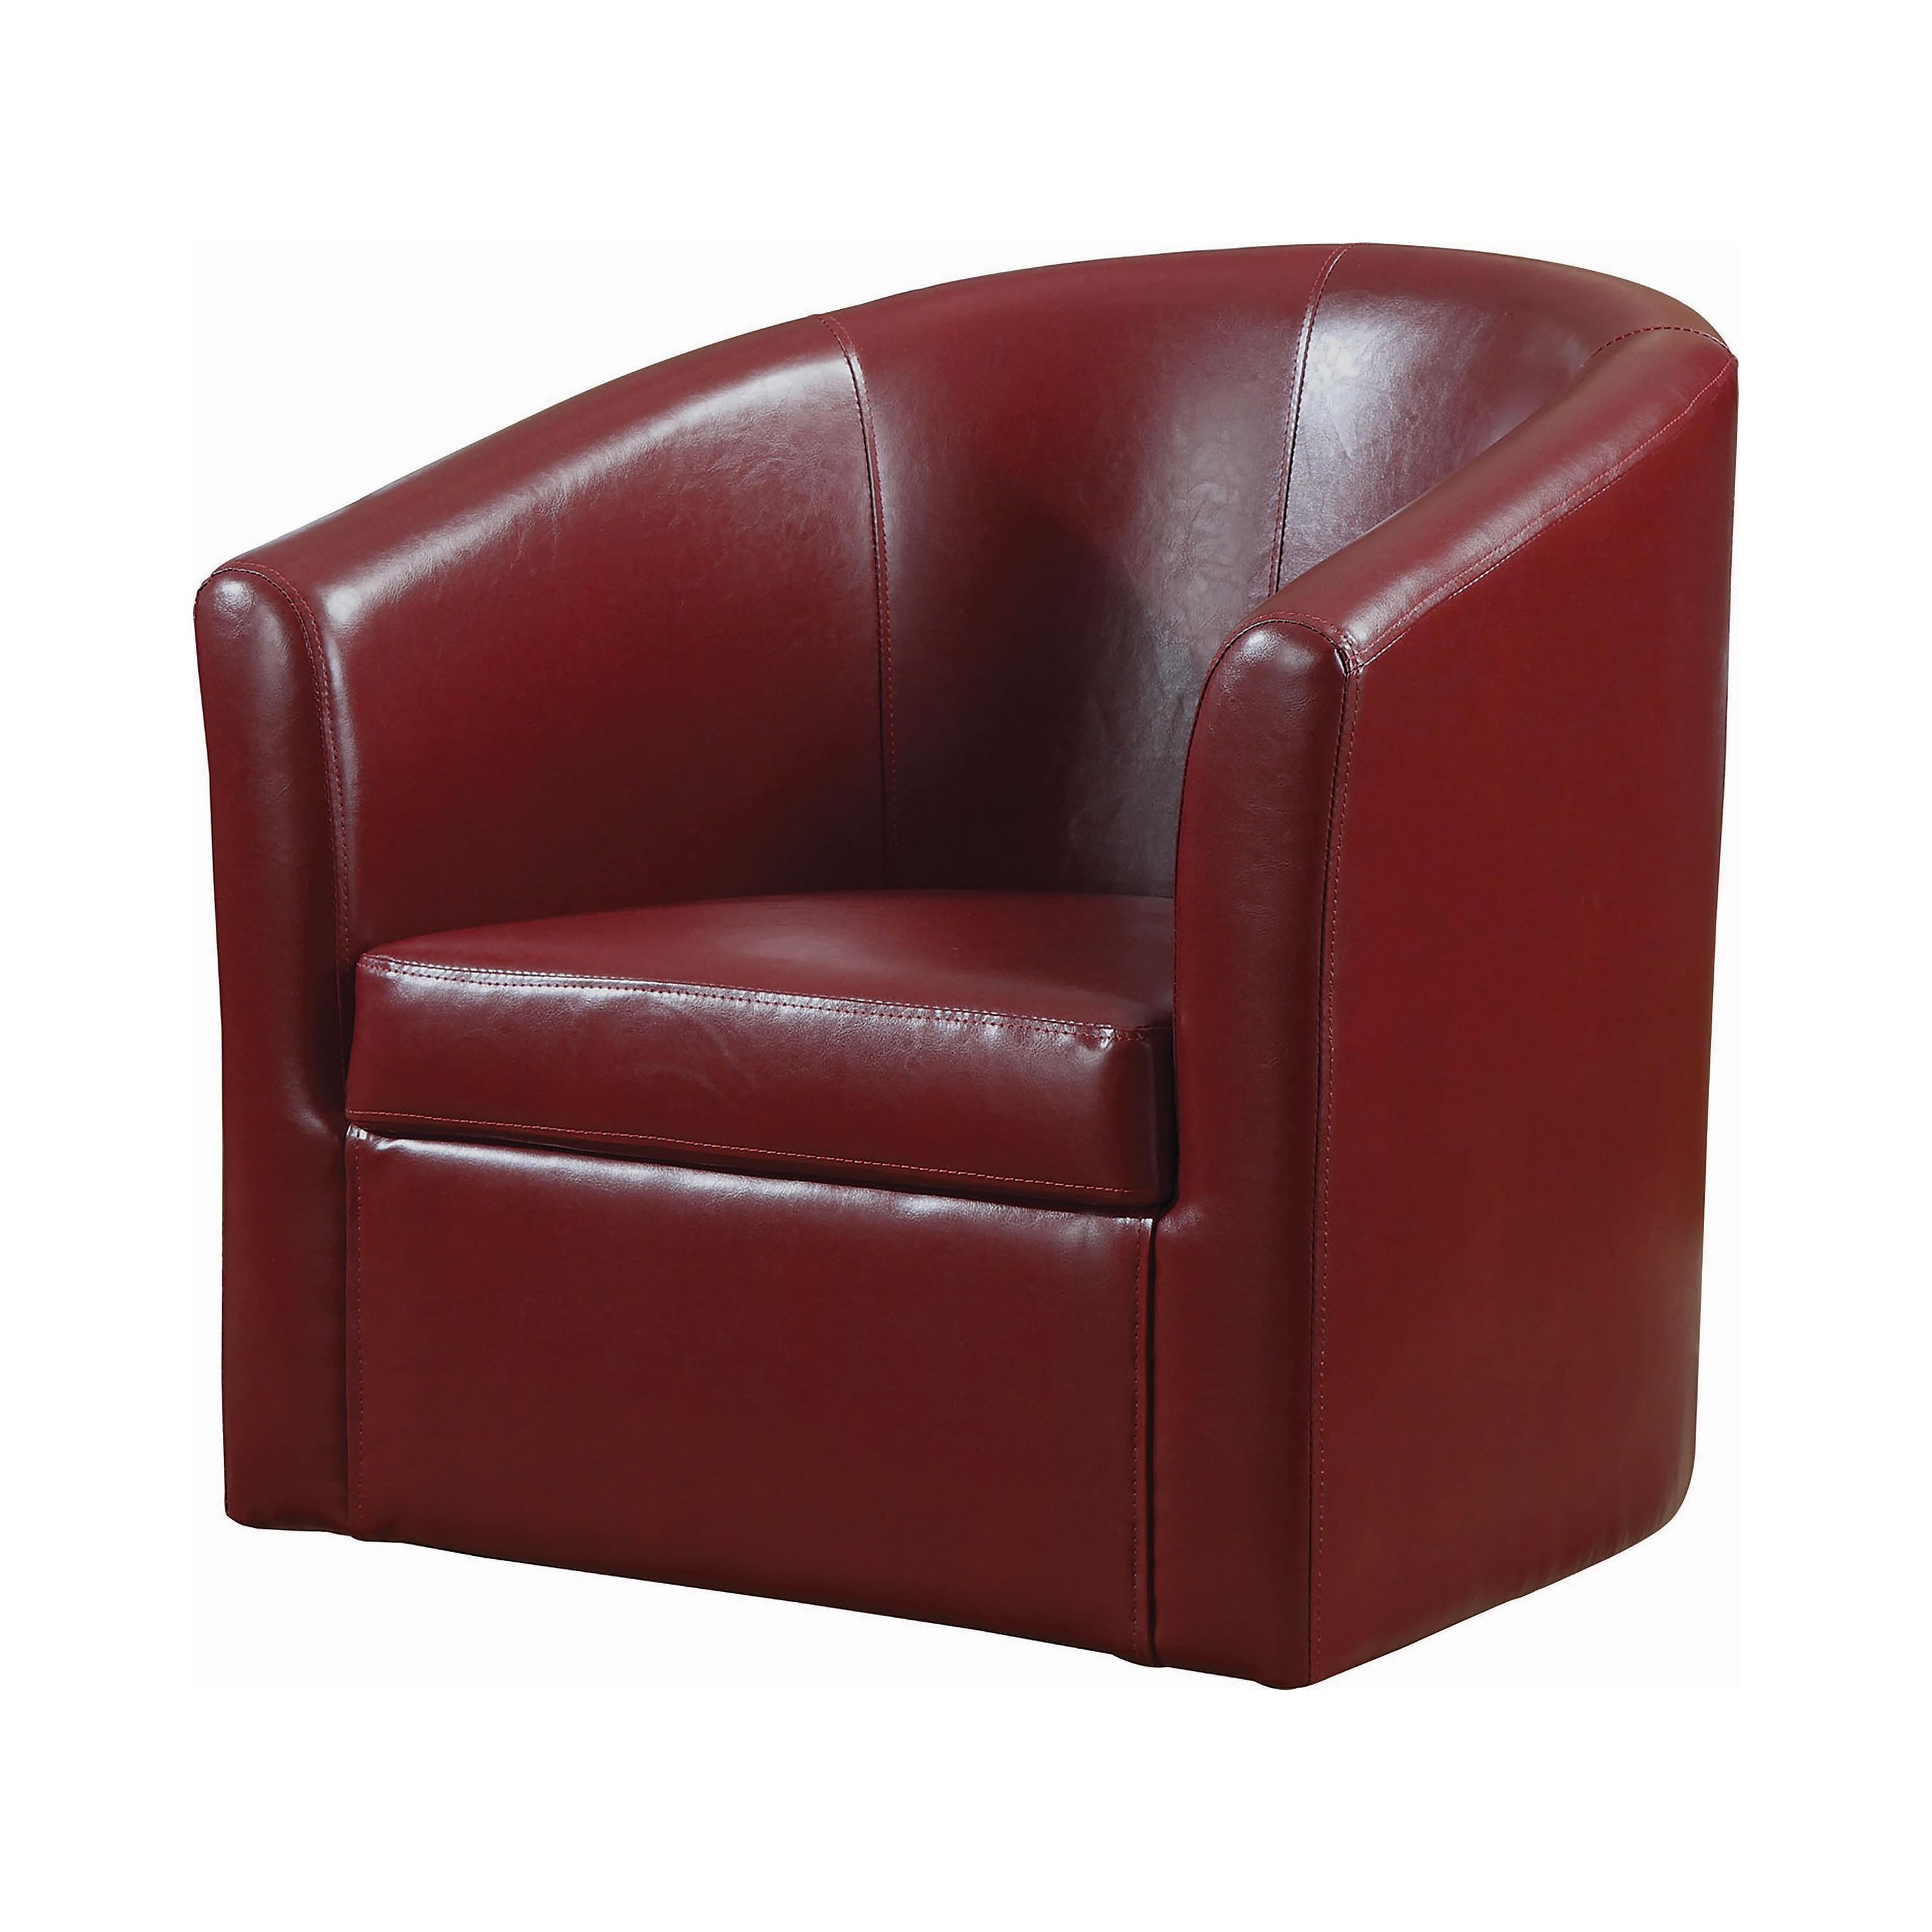 Transitional Accent Chair 902099 902099 in Red Leatherette